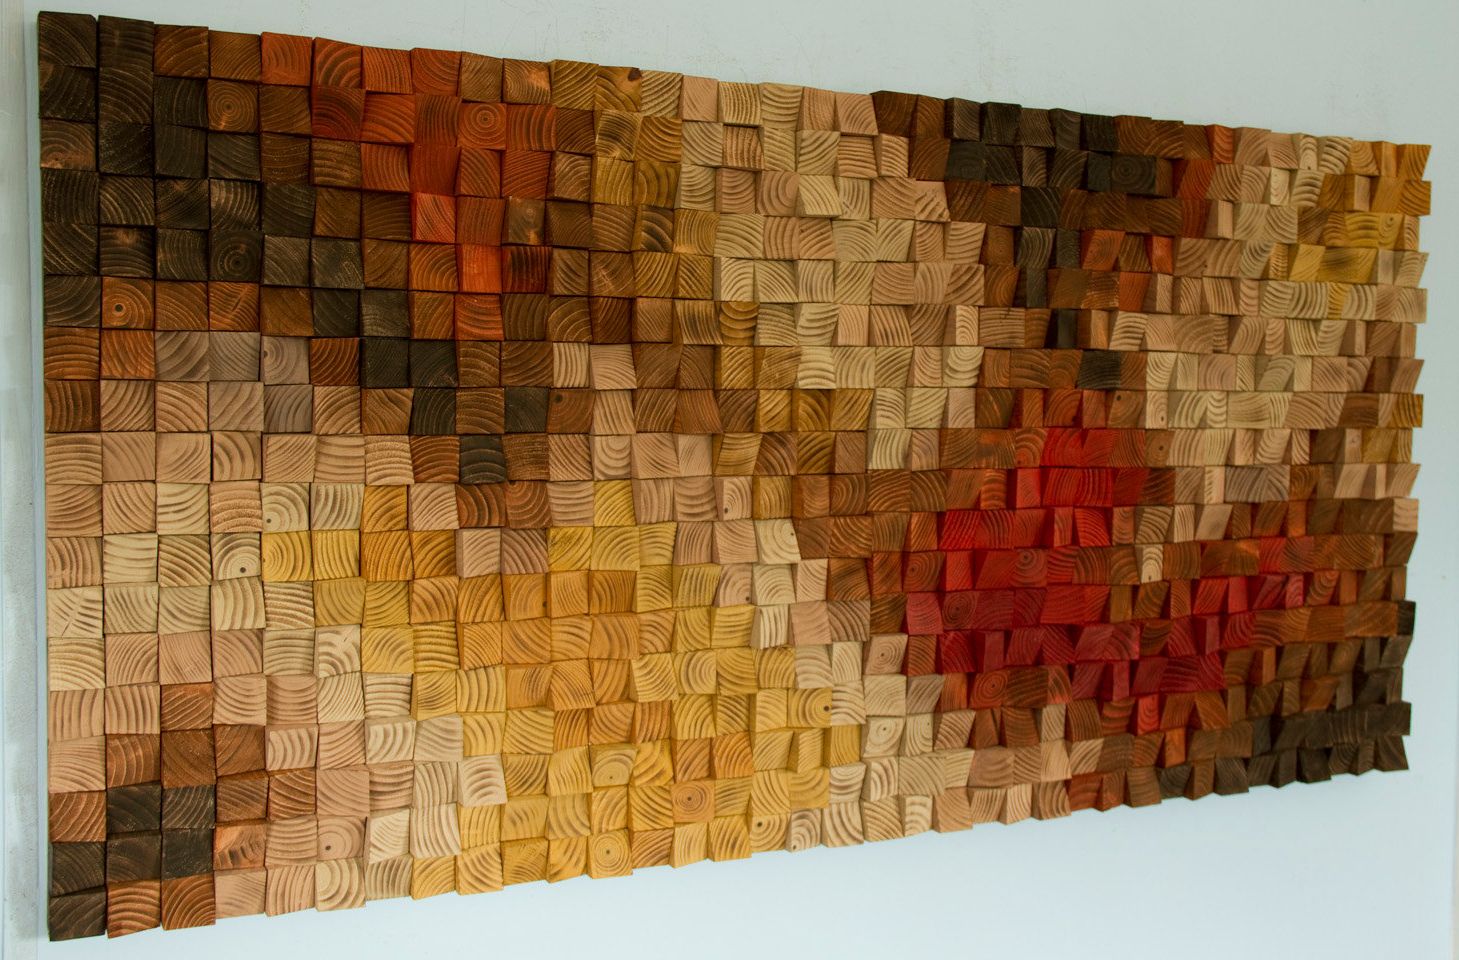 Most Recently Released Abstract Wood Wall Art Pertaining To Large Rustic Wood Wall Art, Wood Wall Sculpture, Abstract (View 7 of 20)